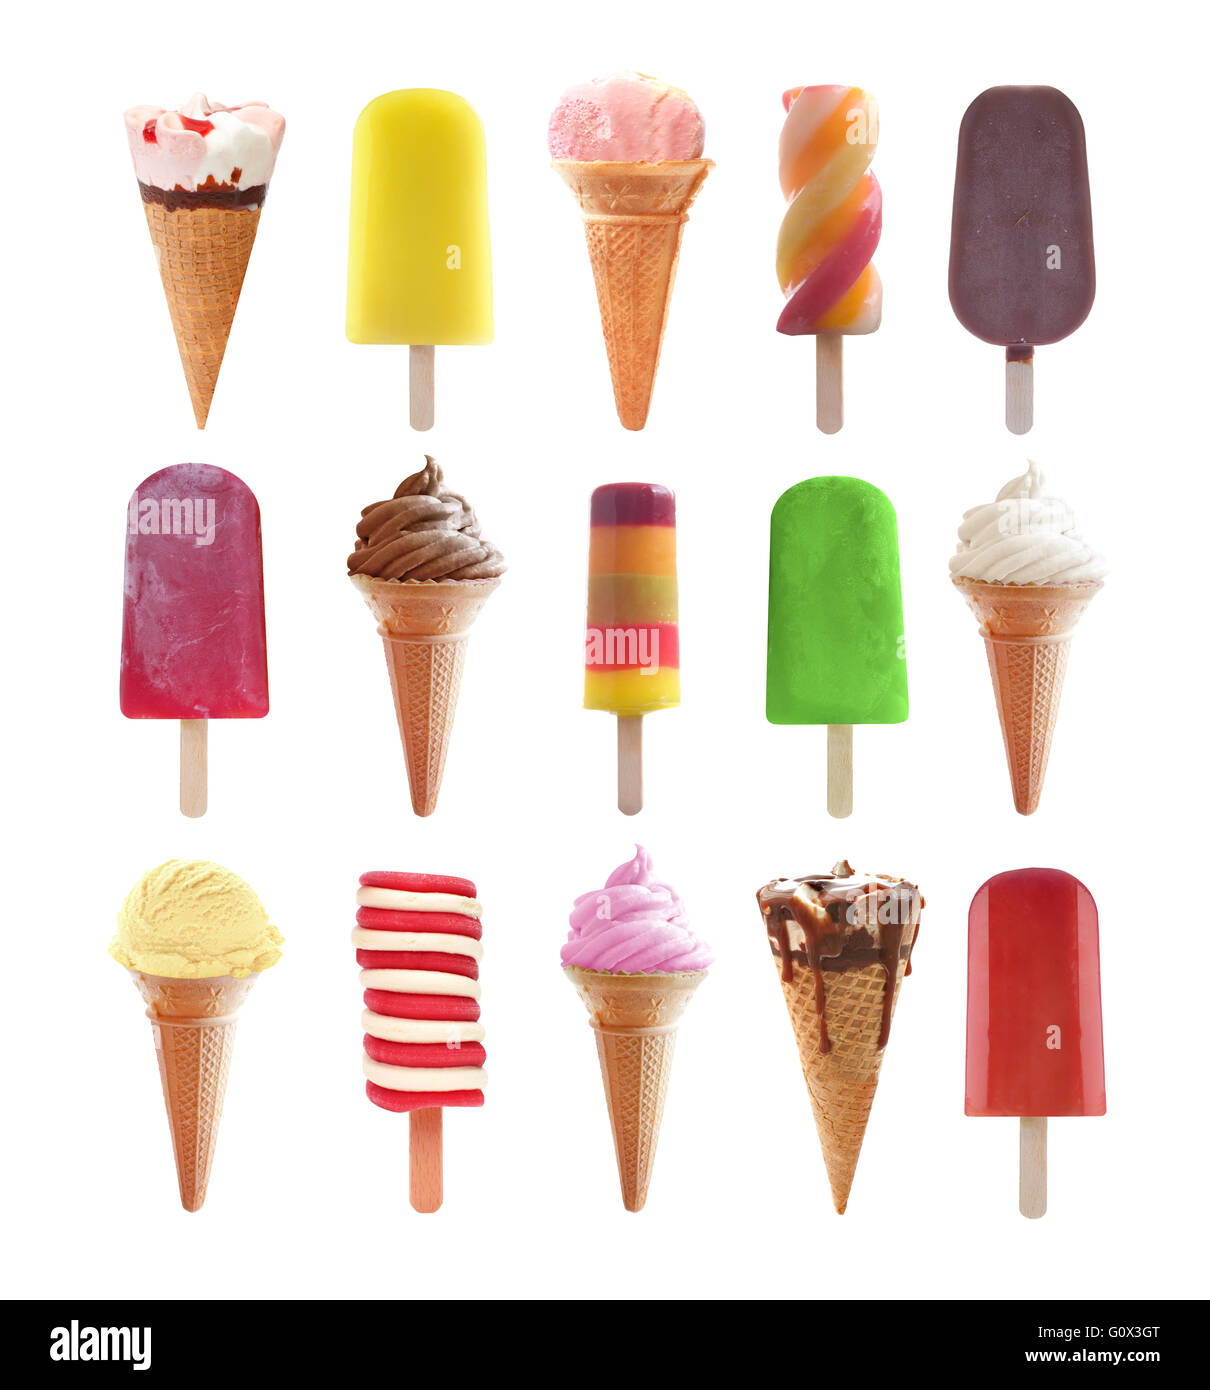 Various icecream, ice lollies and popsicles as a collection over a white background Stock Photo